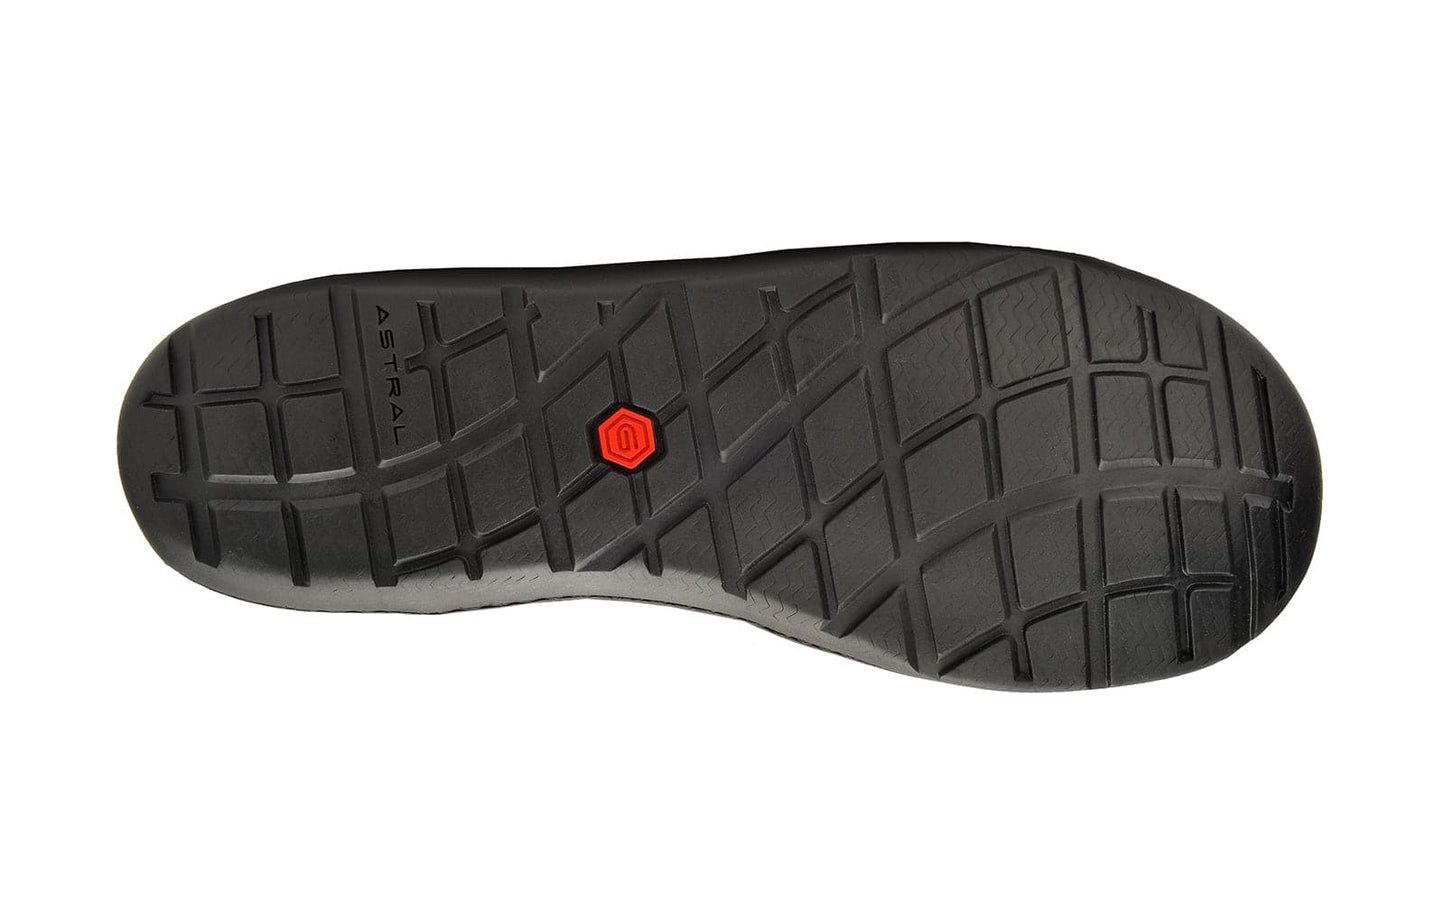 Featuring the Hiyak men's footwear, water shoe, women's footwear manufactured by Astral shown here from a fifth angle.